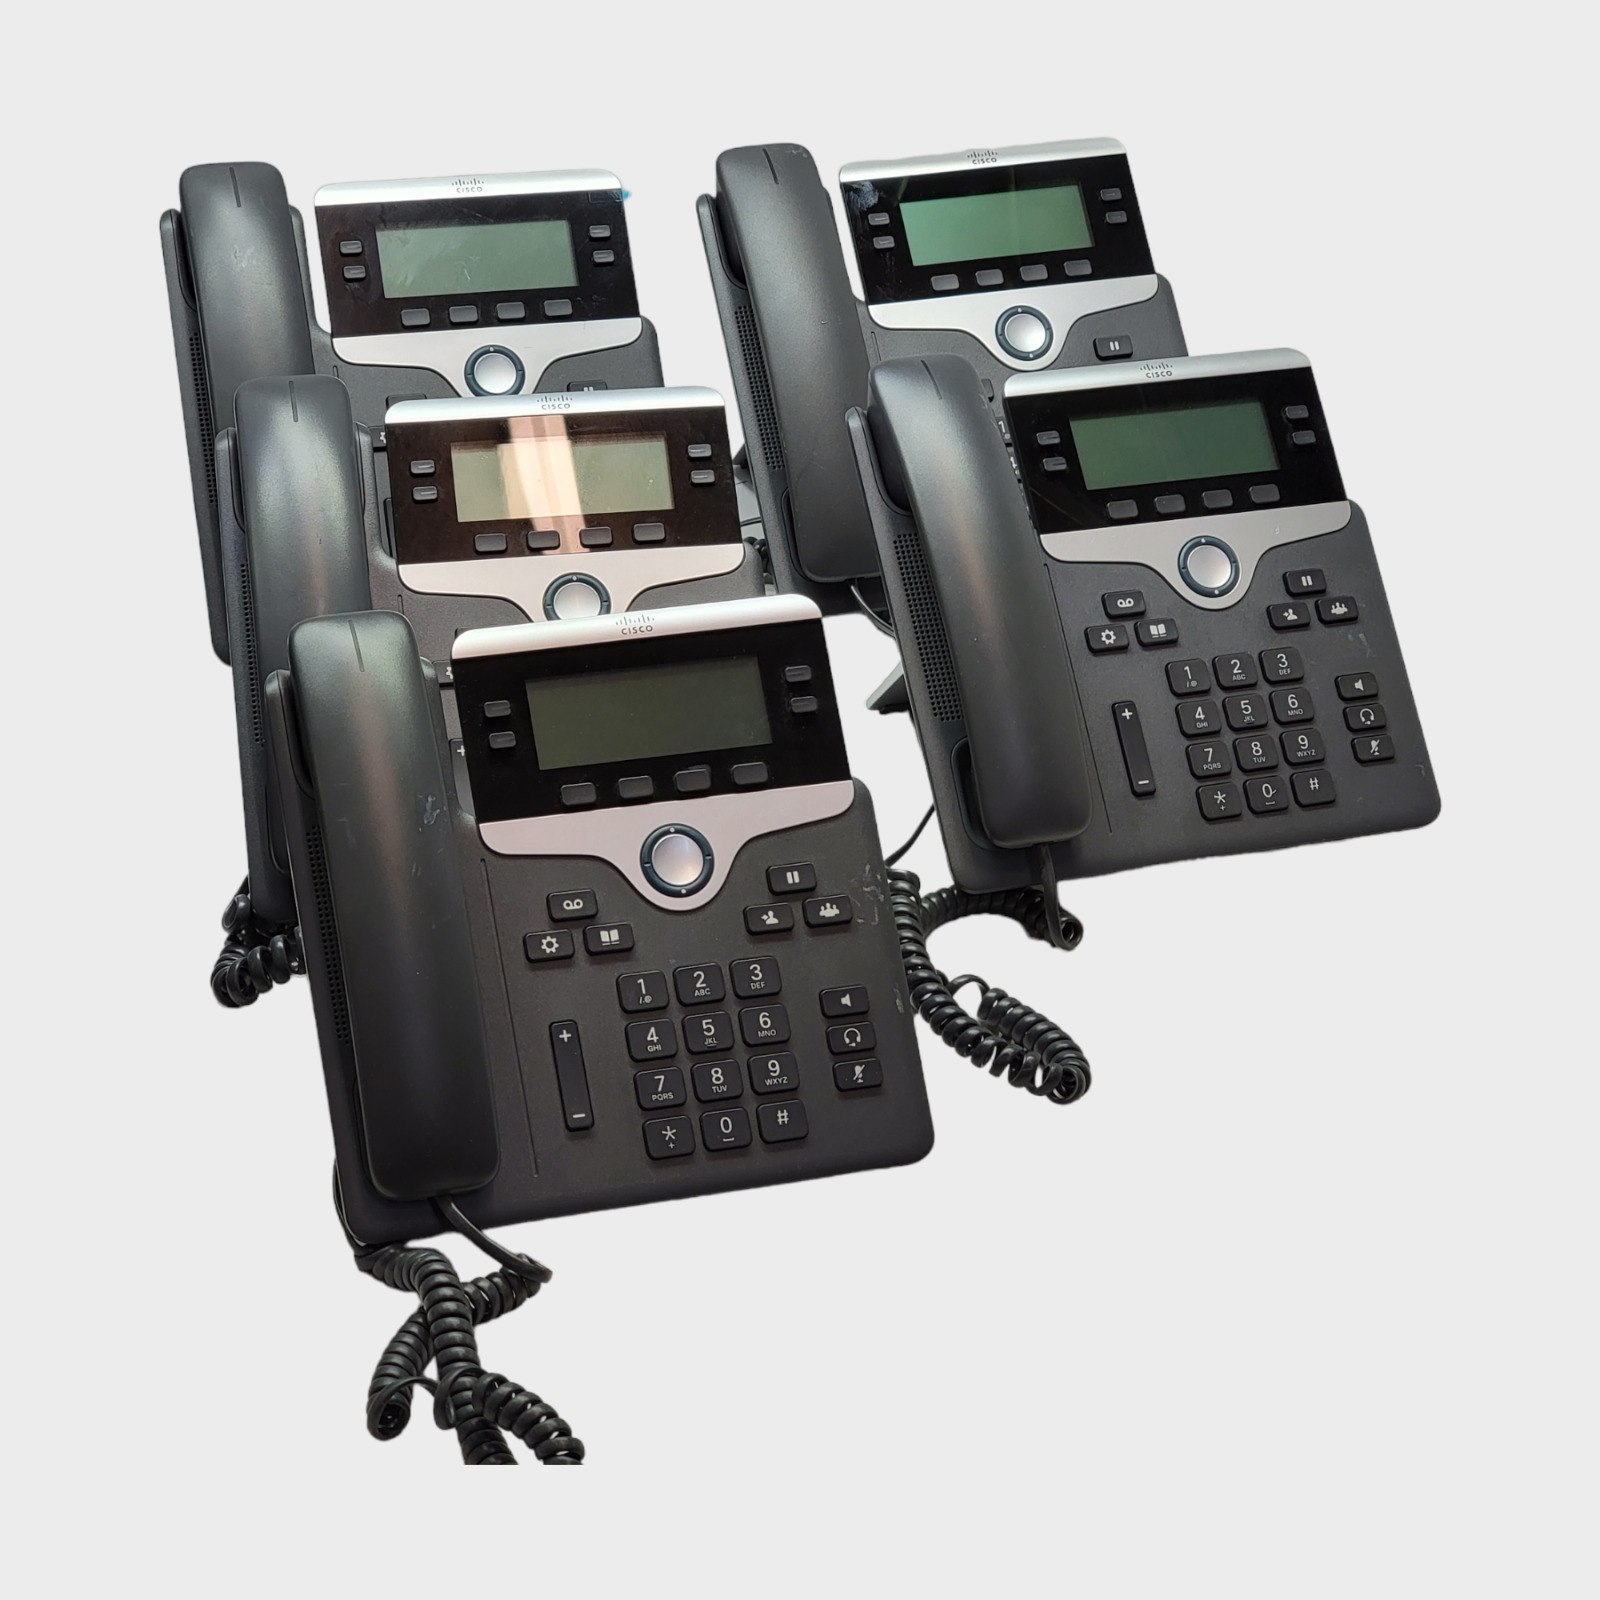 Cisco 7841 CP-7841-K9 VoIP Phone With Stand 4 Line Display Phone Lot of 5